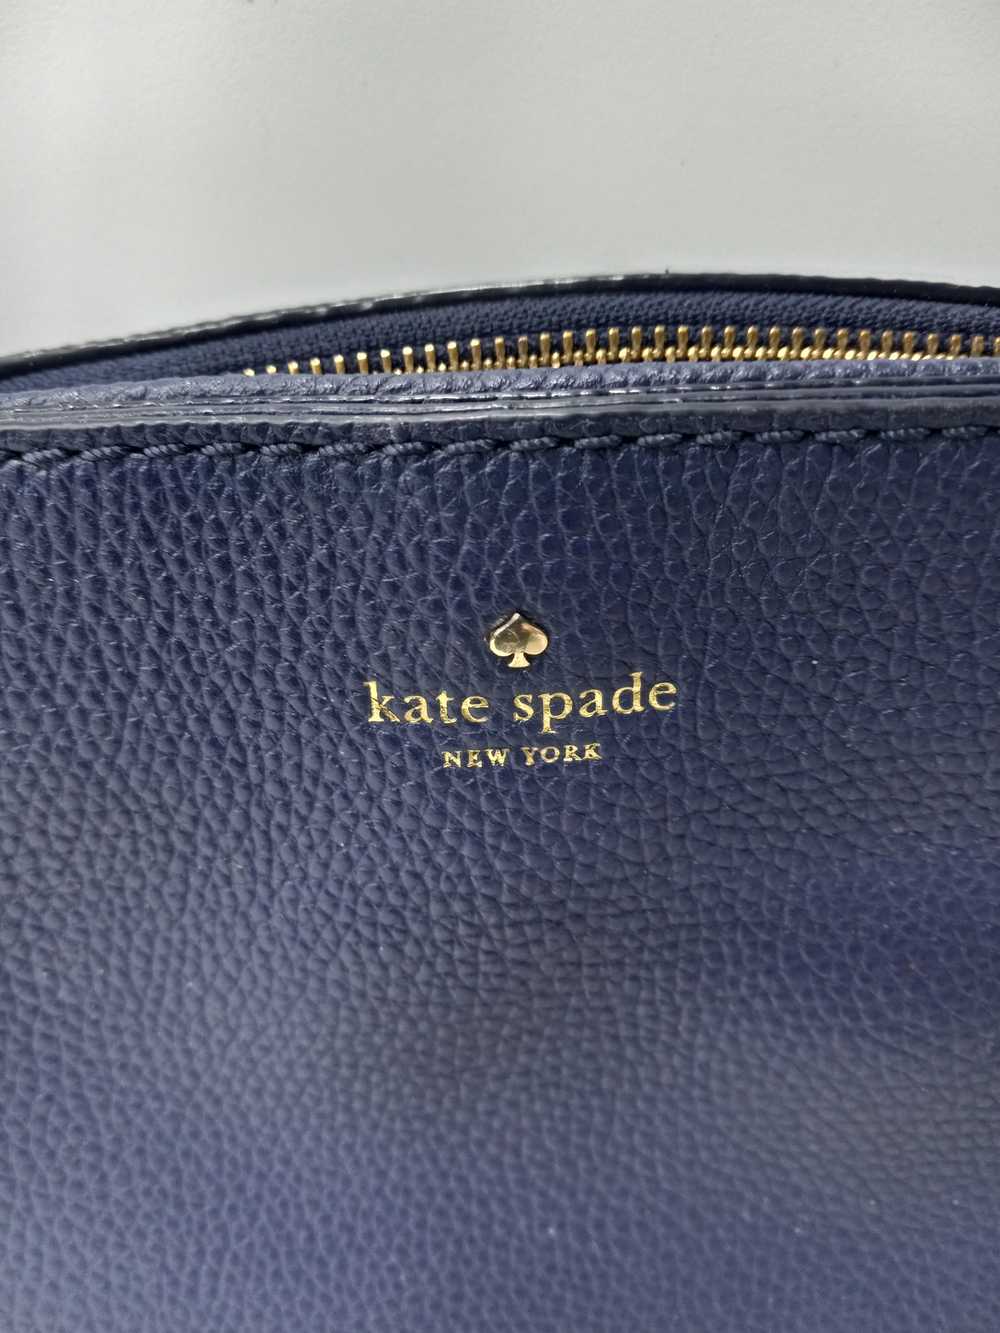 Bundle of 3 Assorted Kate Spade Women's Leather P… - image 3